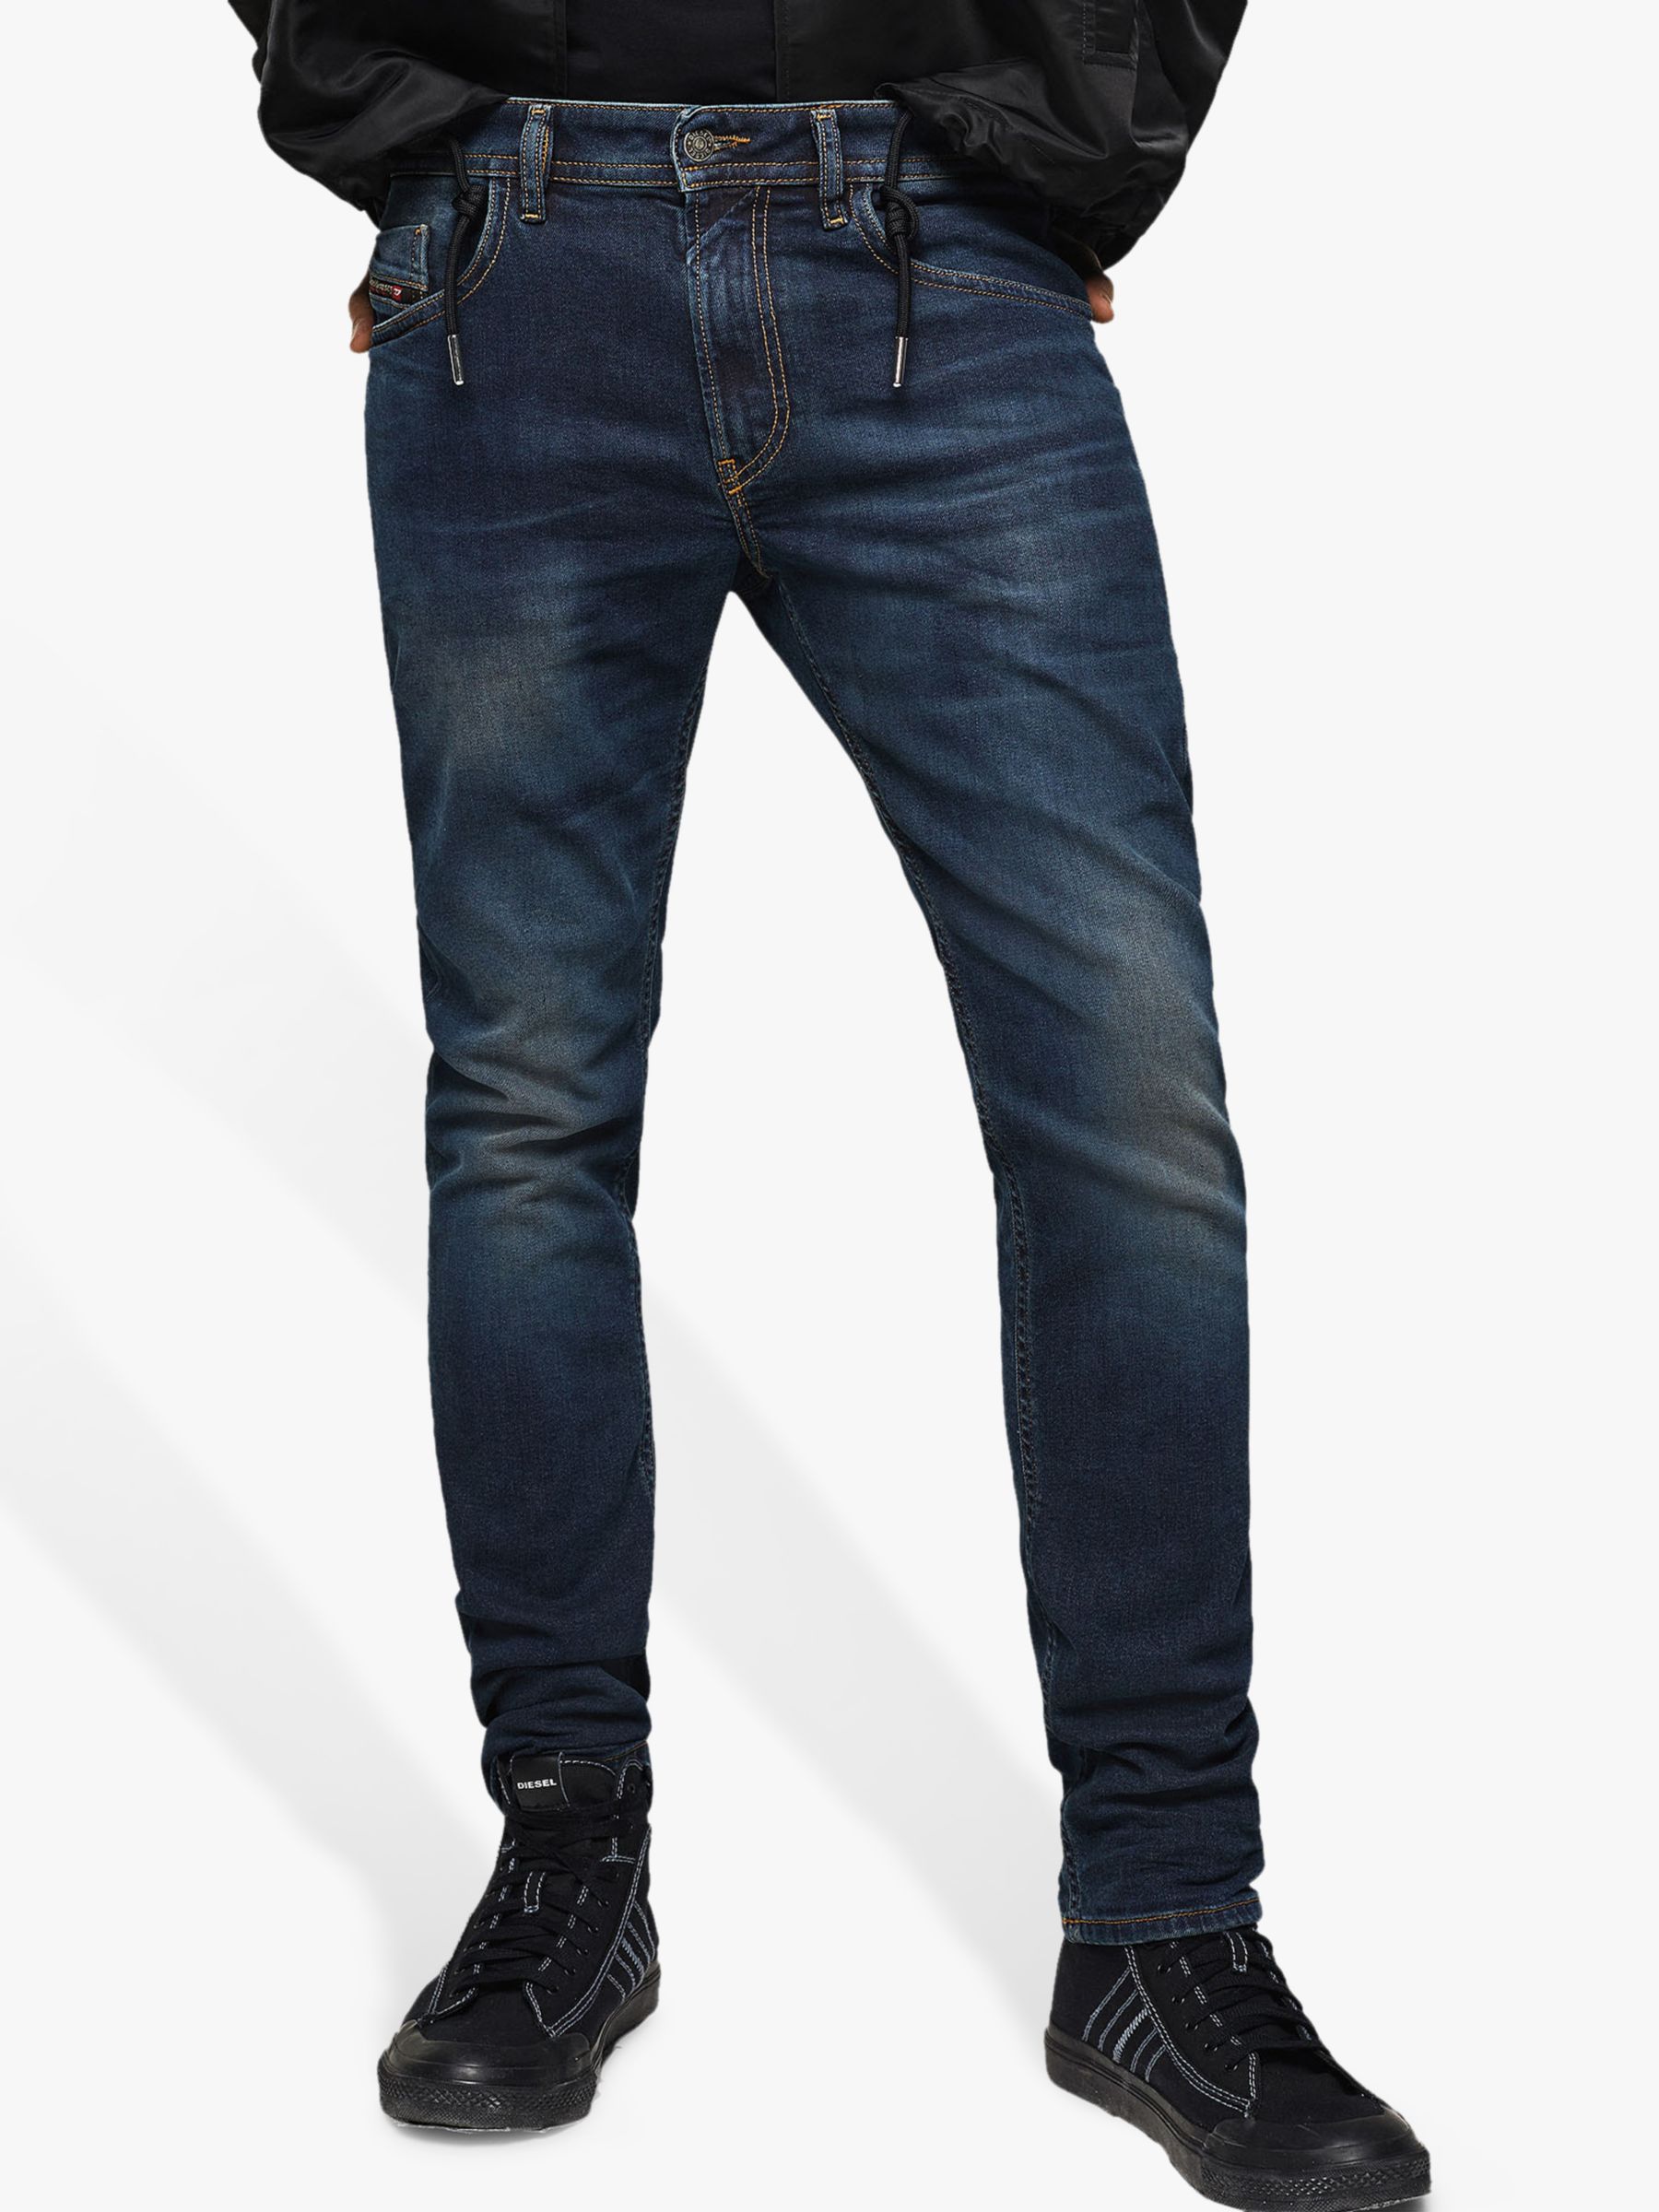 kut from the kloth baby bootcut jeans